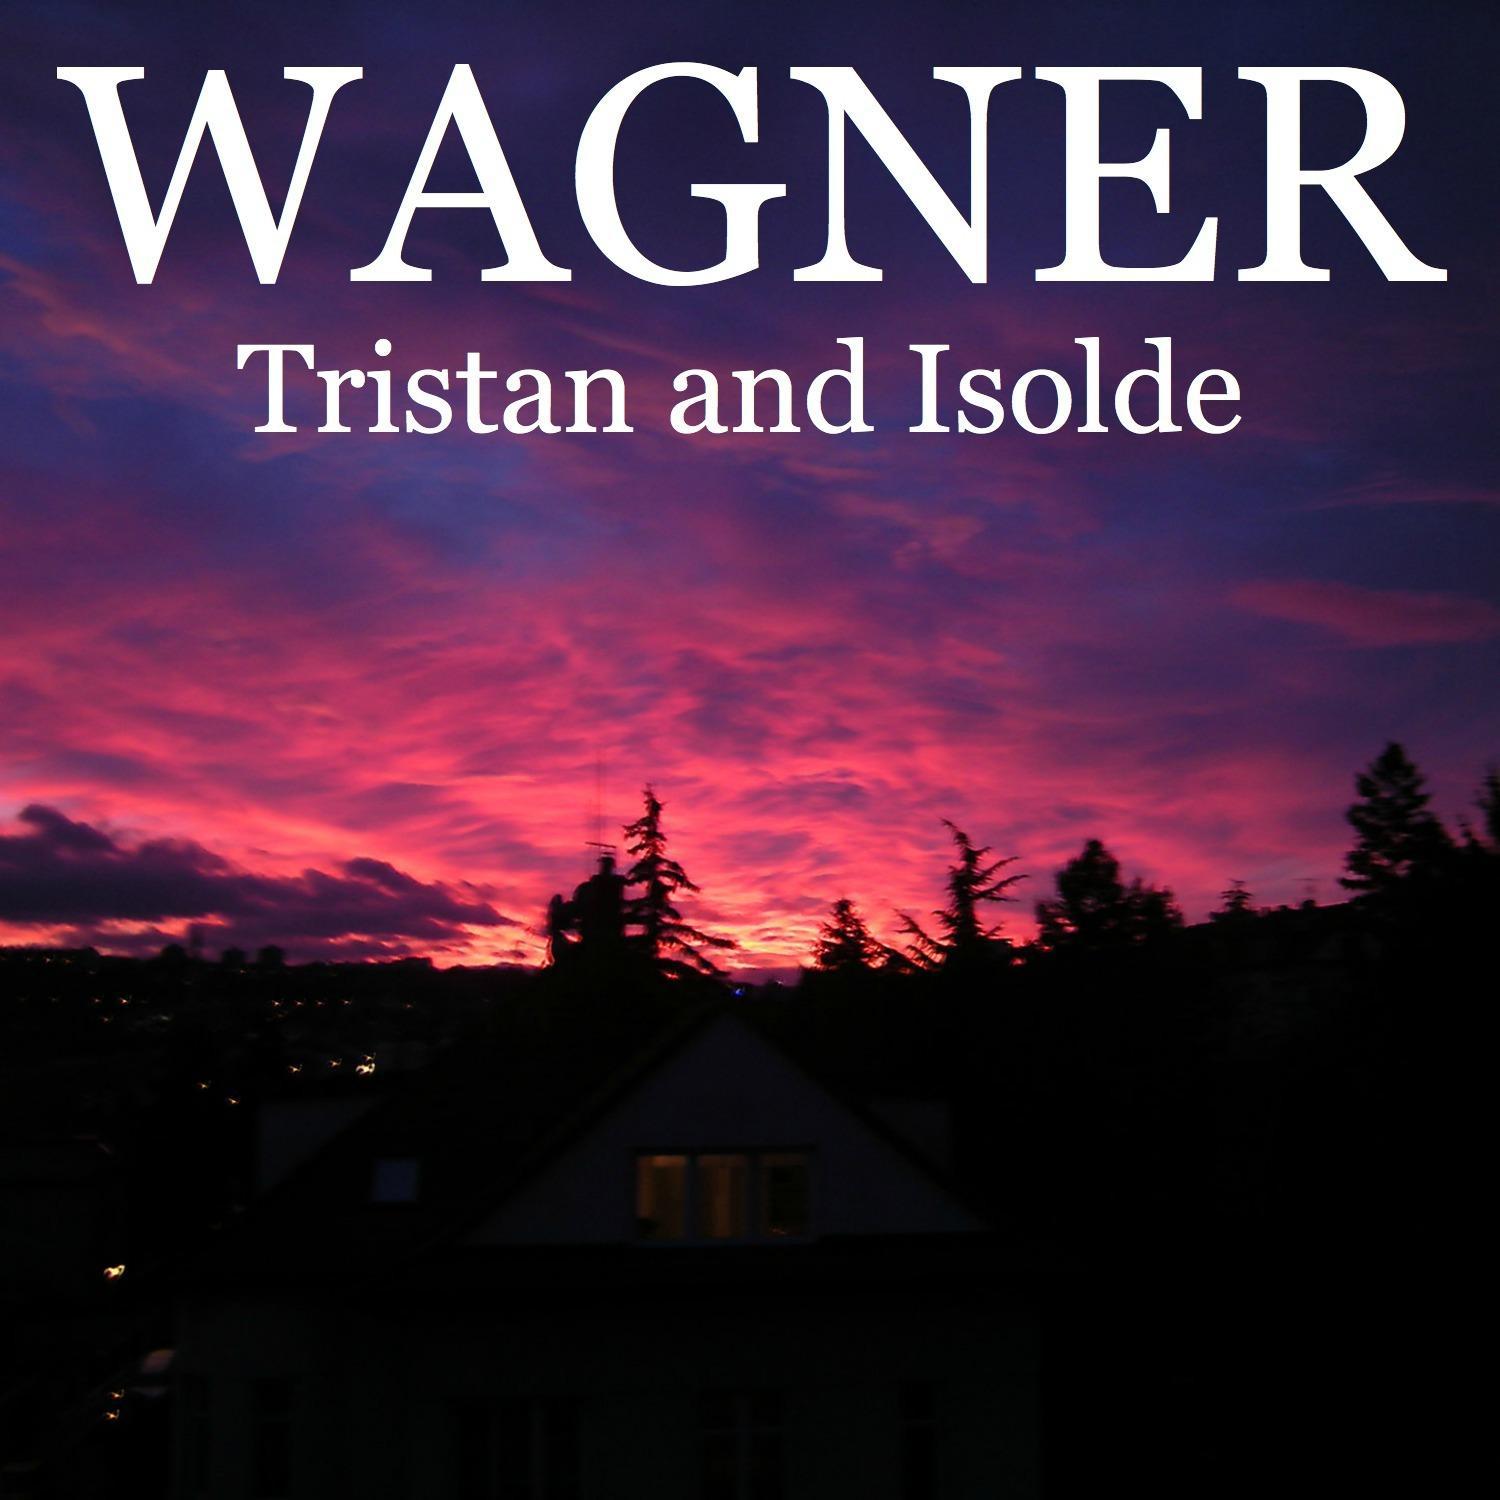 Wagner - Tristan and Isolde: Prelude and Liebestod